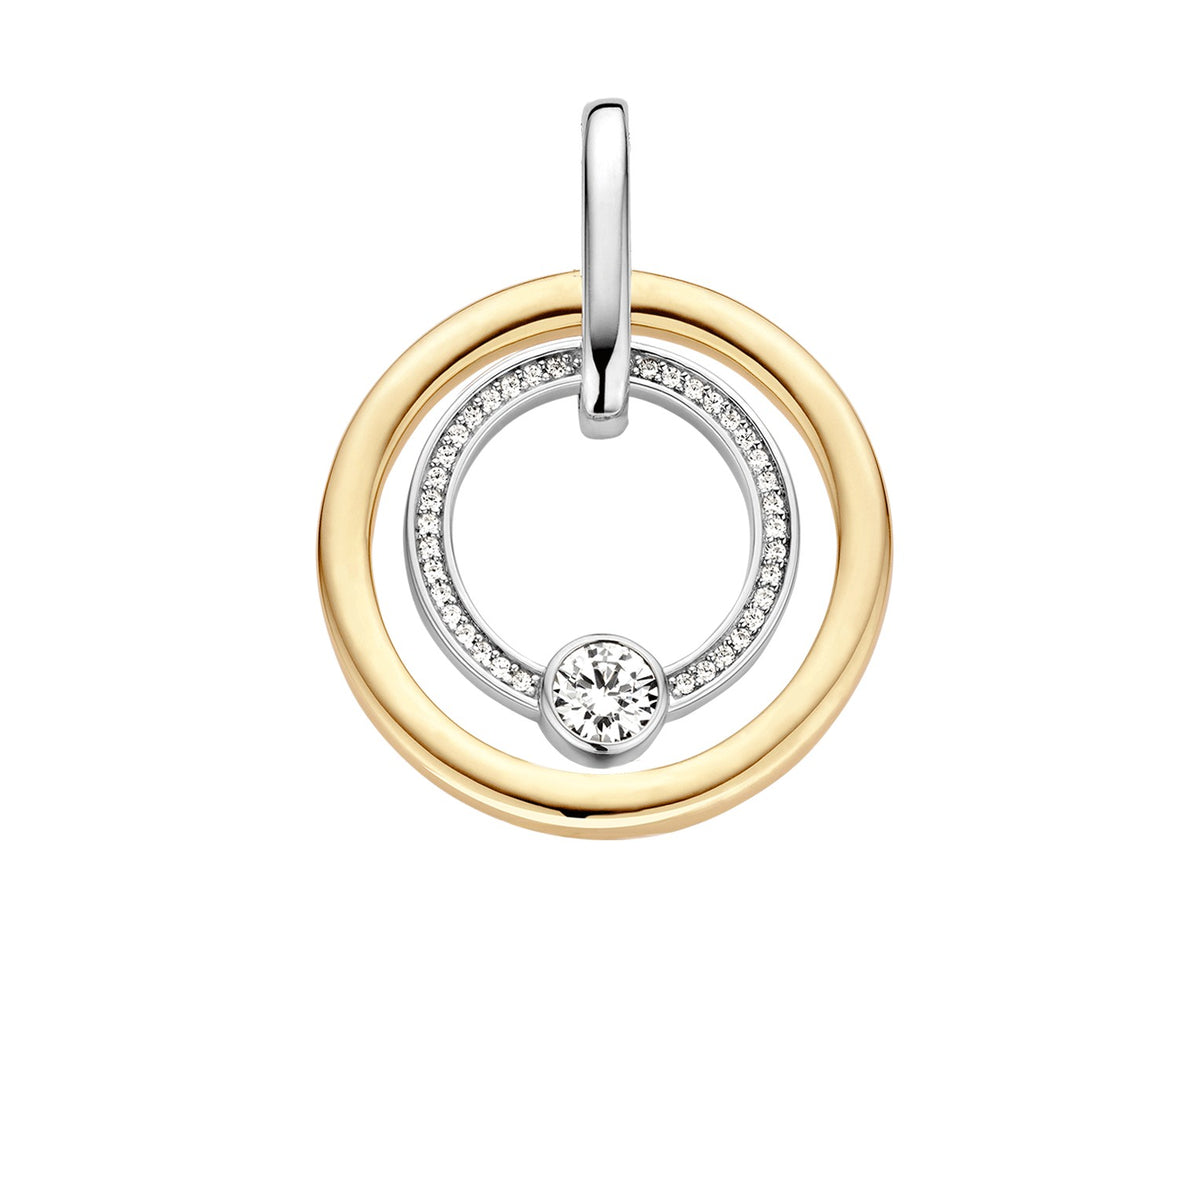 TI SENTO Sterling Silver Two Tone Double Circle Pendant with Cubic Zirconias